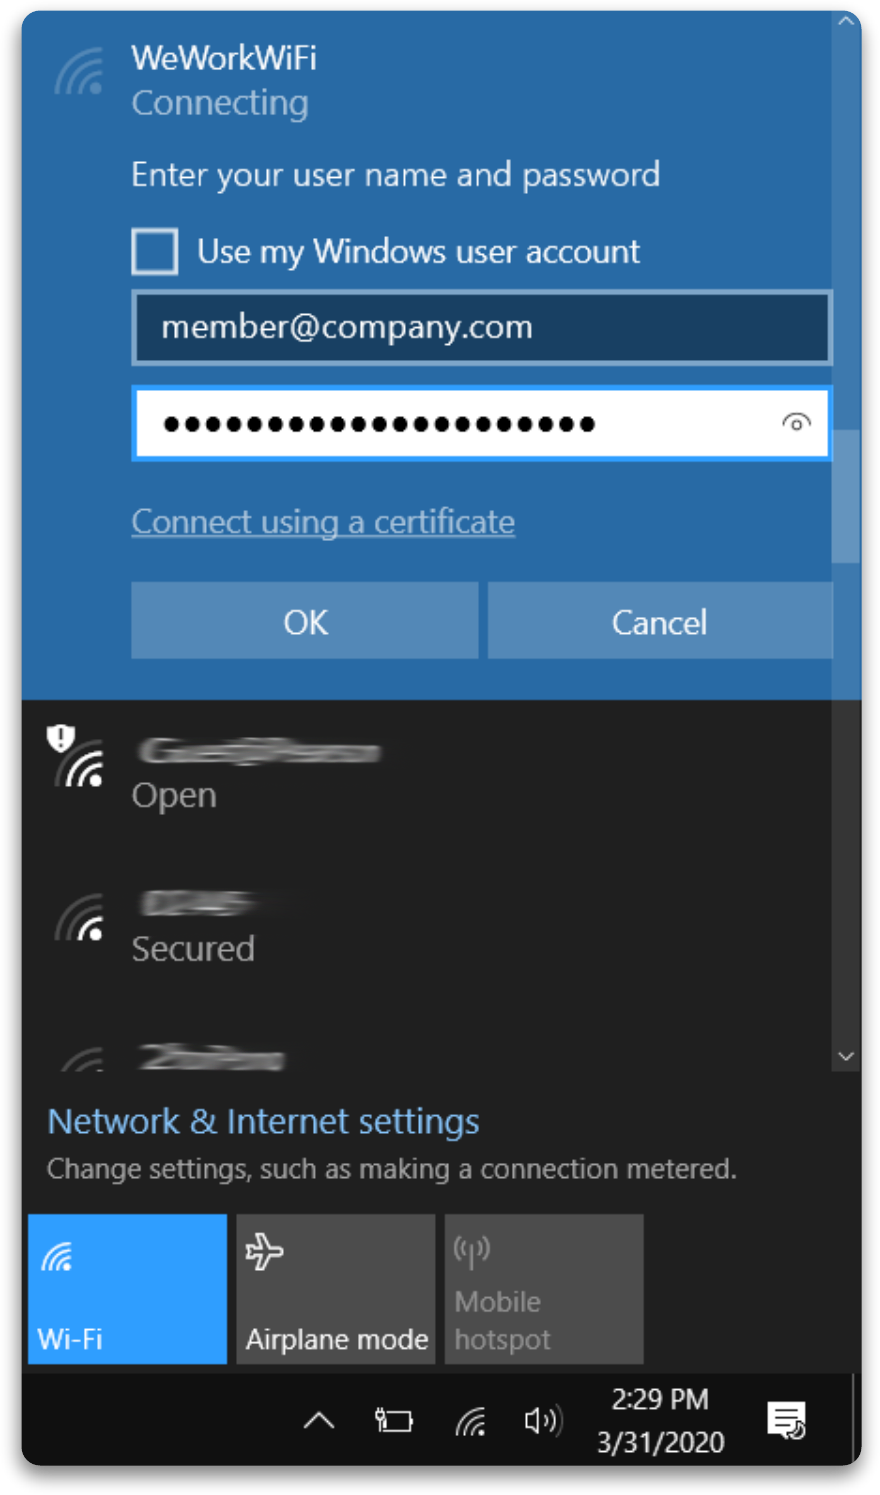 How do I connect my device to the WeWorkWiFi?